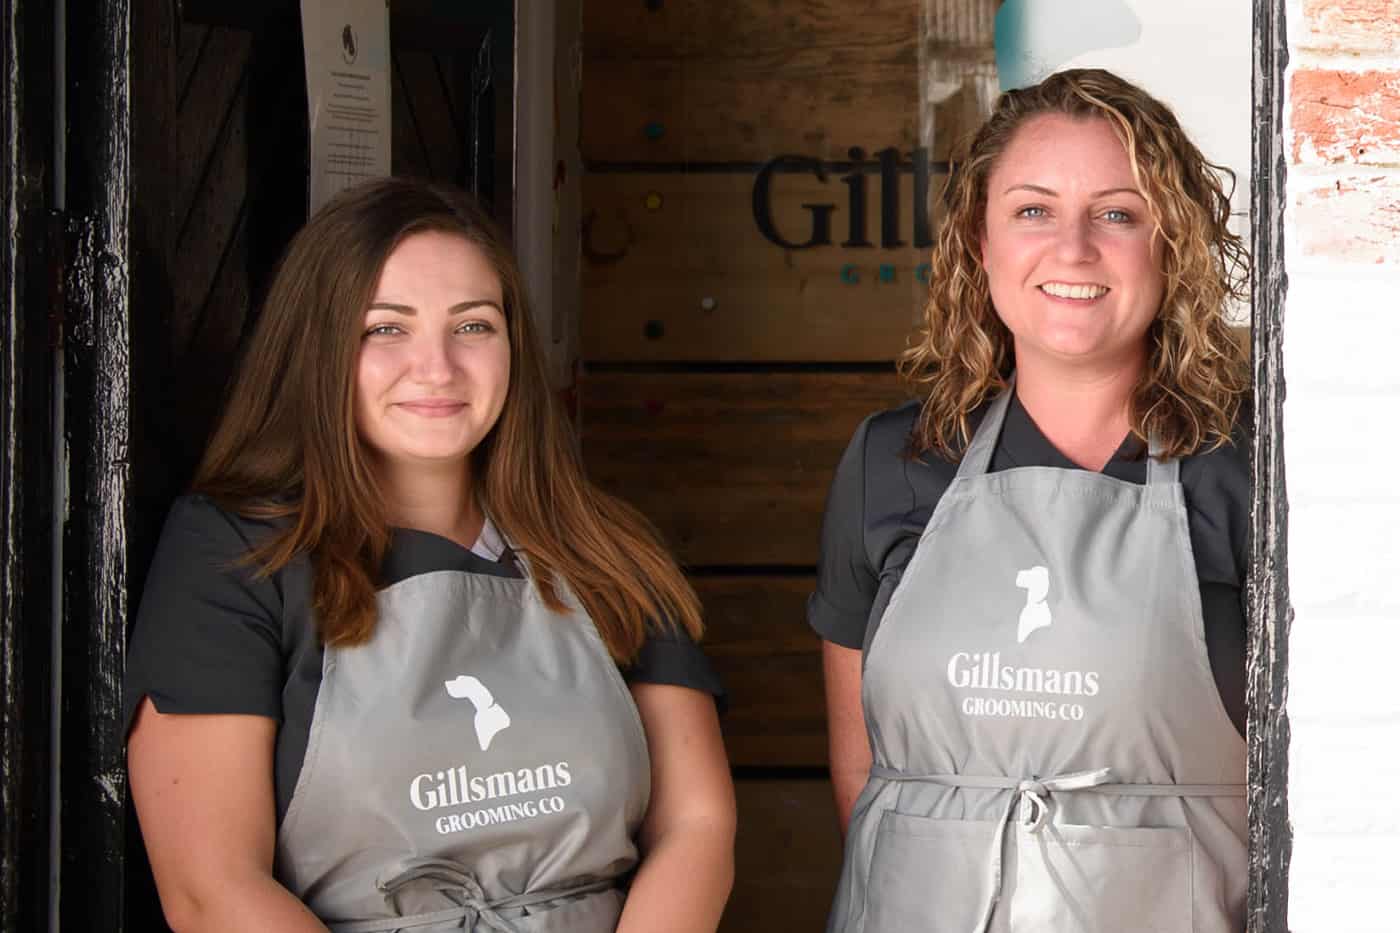 About Gillsmans Grooming Co Hastings